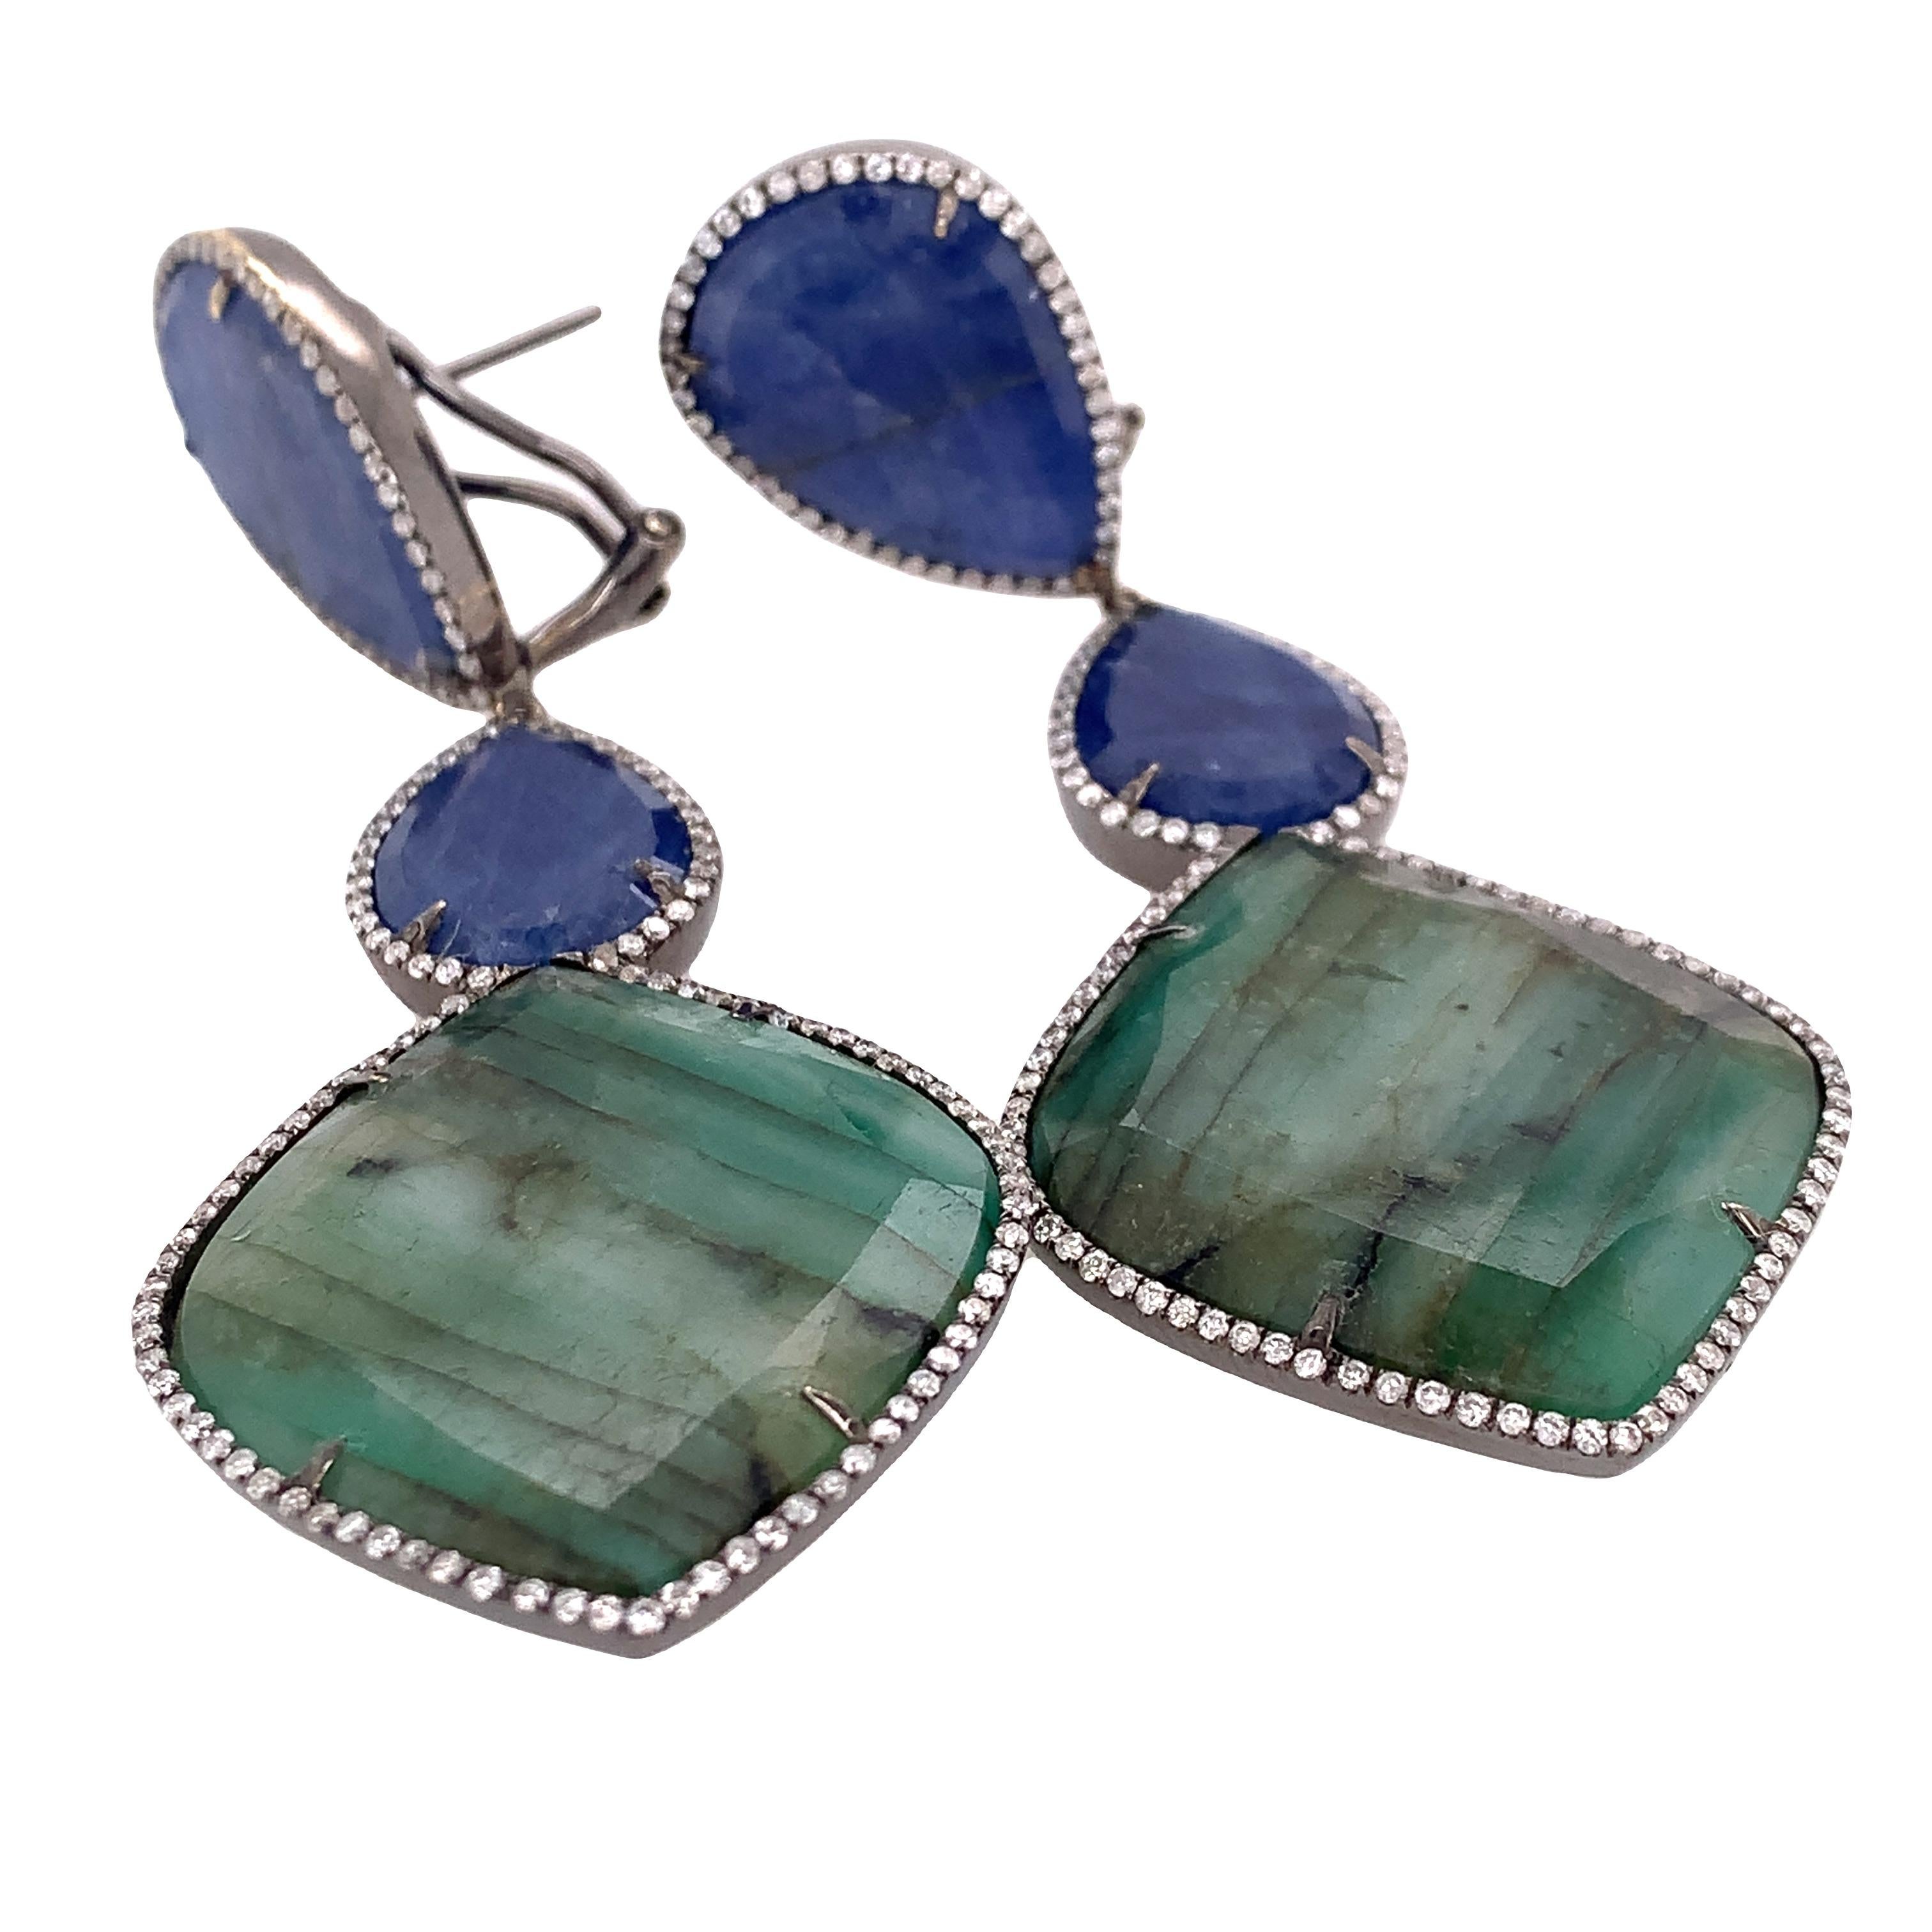 Lillipad Collection

Blue Sapphire and Emerald are wrapped by Diamond feature as dangling earrings set in 18k black gold. All gemstones are natural slice.

Blue Sapphire: 29.33ct total weight.
Emerald: 30.92ct total weight.
Diamond: 1.17ct total